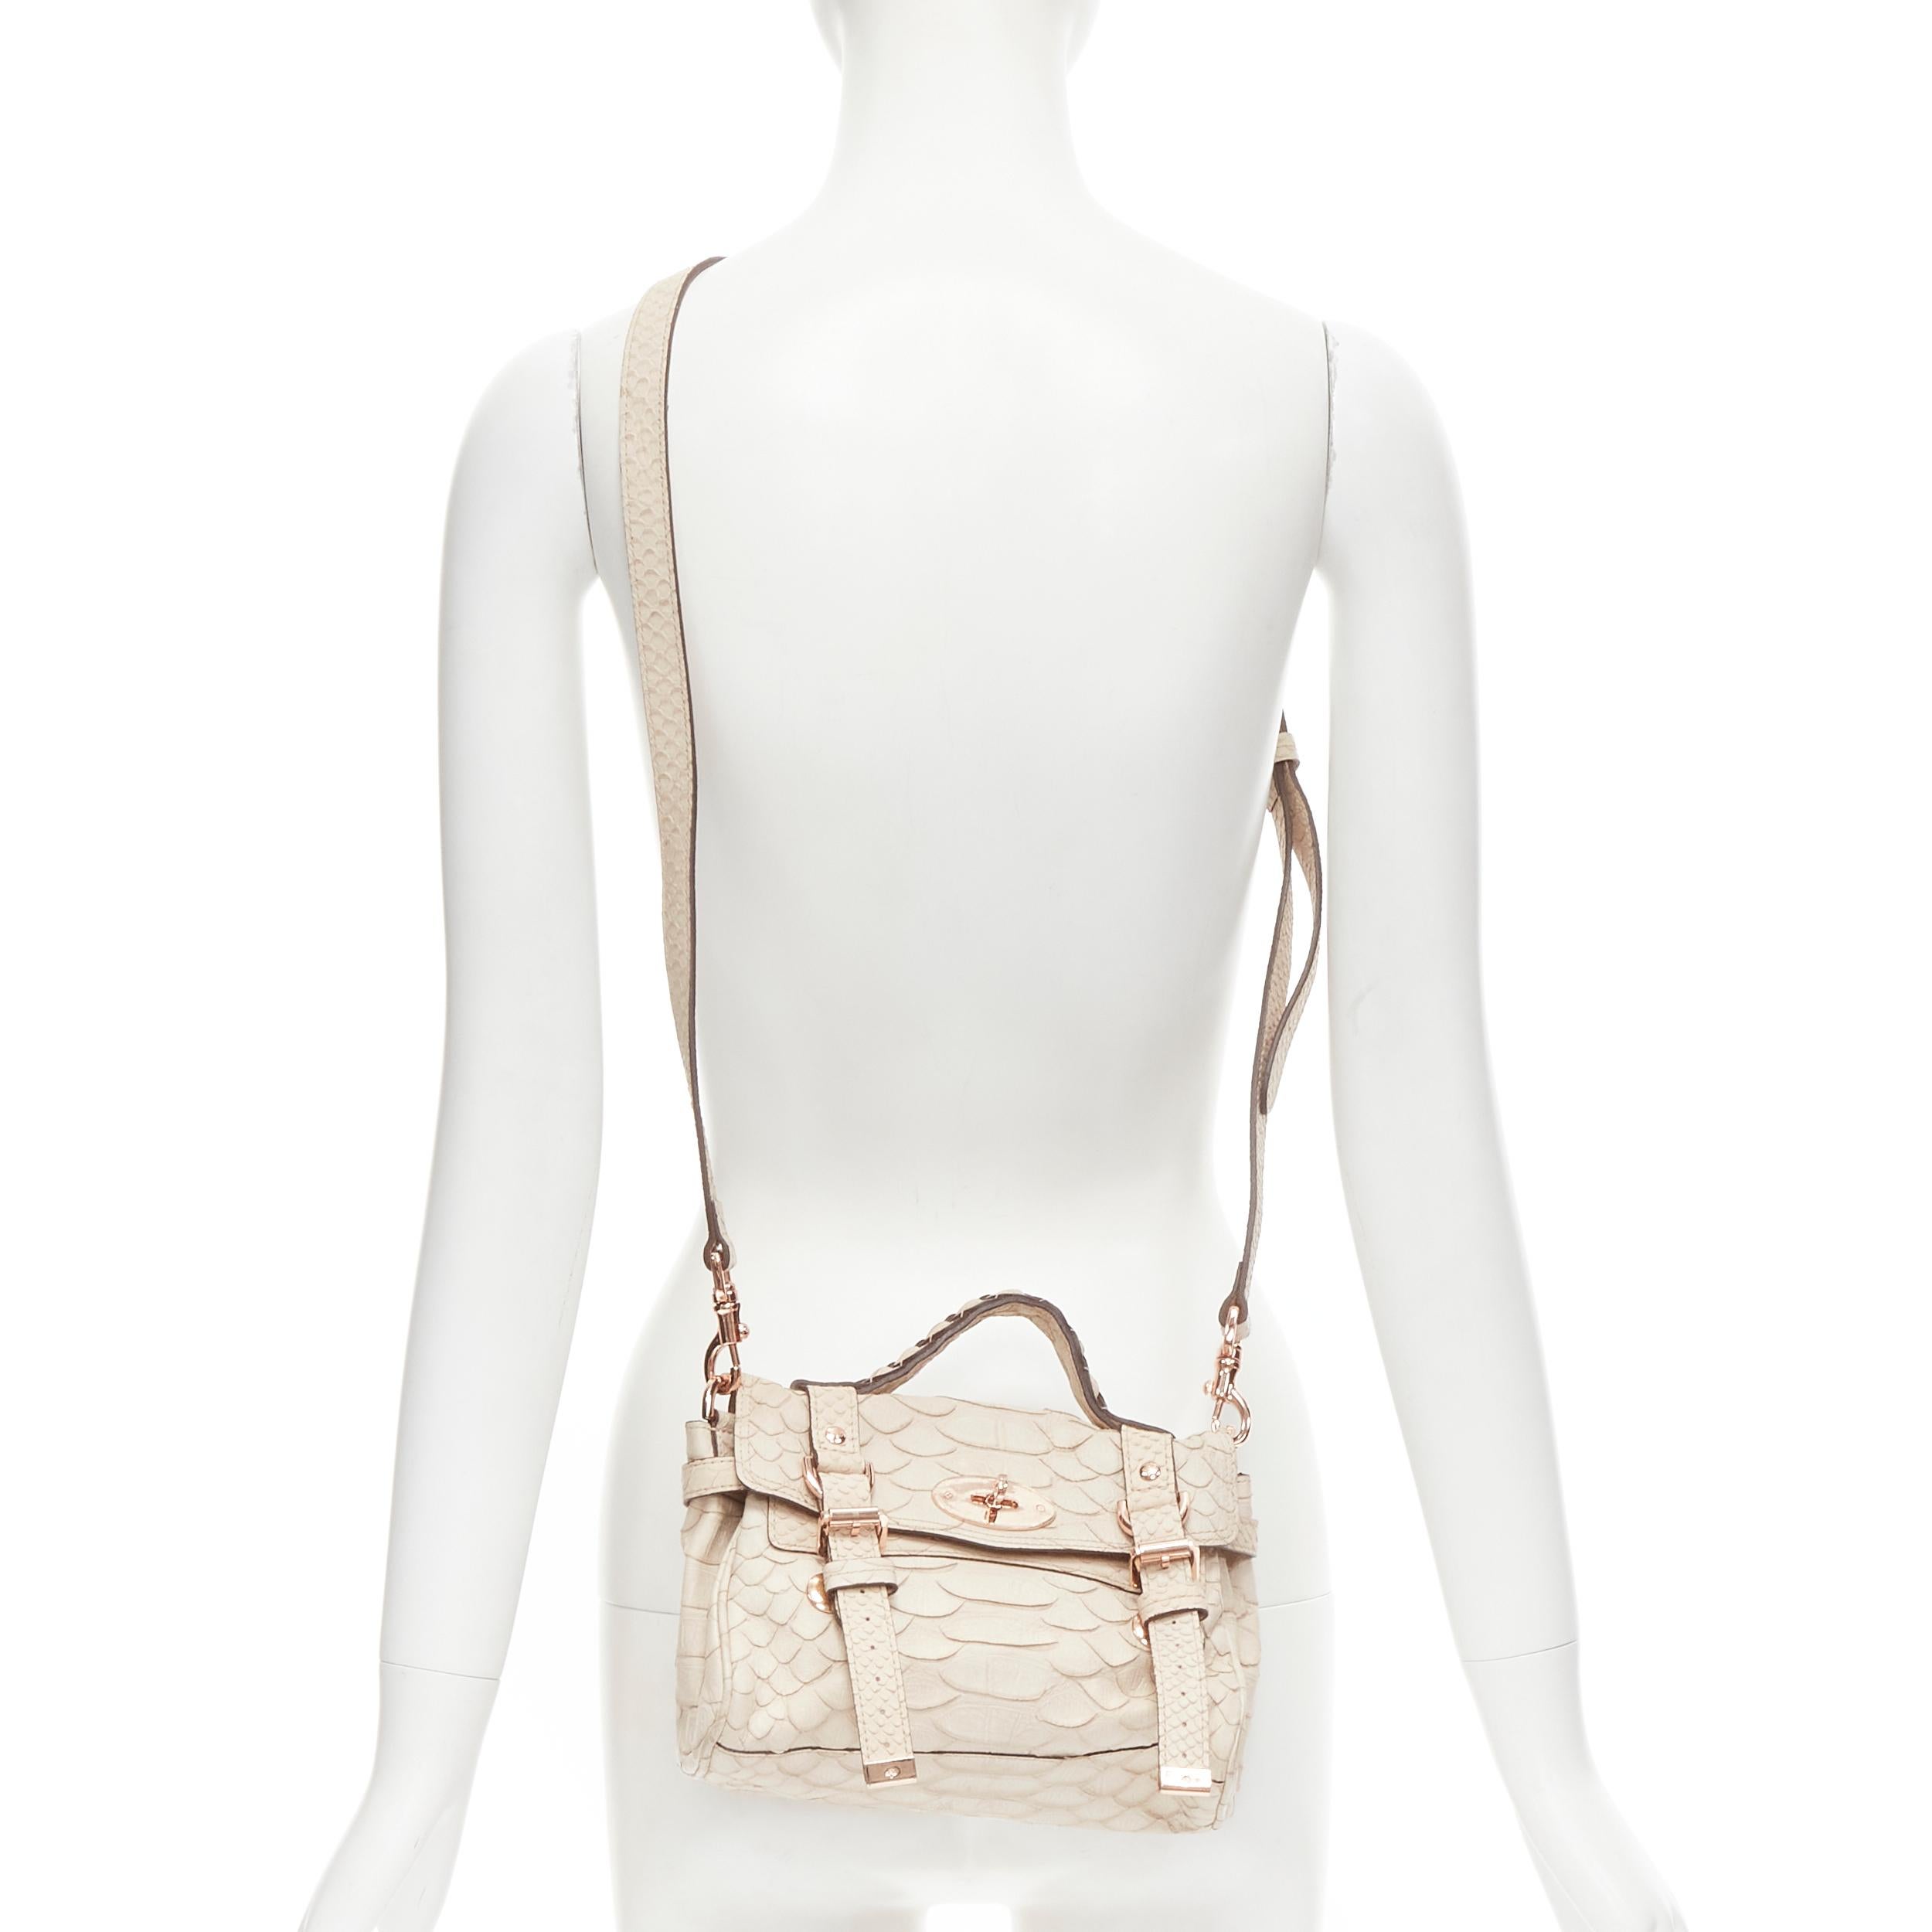 MULBERRY Mini Alexa rose gold pale pink scaled leather crossbody top handle satchel bag 
Reference: JECN/A00023 
Brand: Mulberry 
Model: Alexa Mini 
Material: Leather 
Color: Grey 
Pattern: Solid 
Closure: Turnlock 
Extra Detail: Rose gold-tone